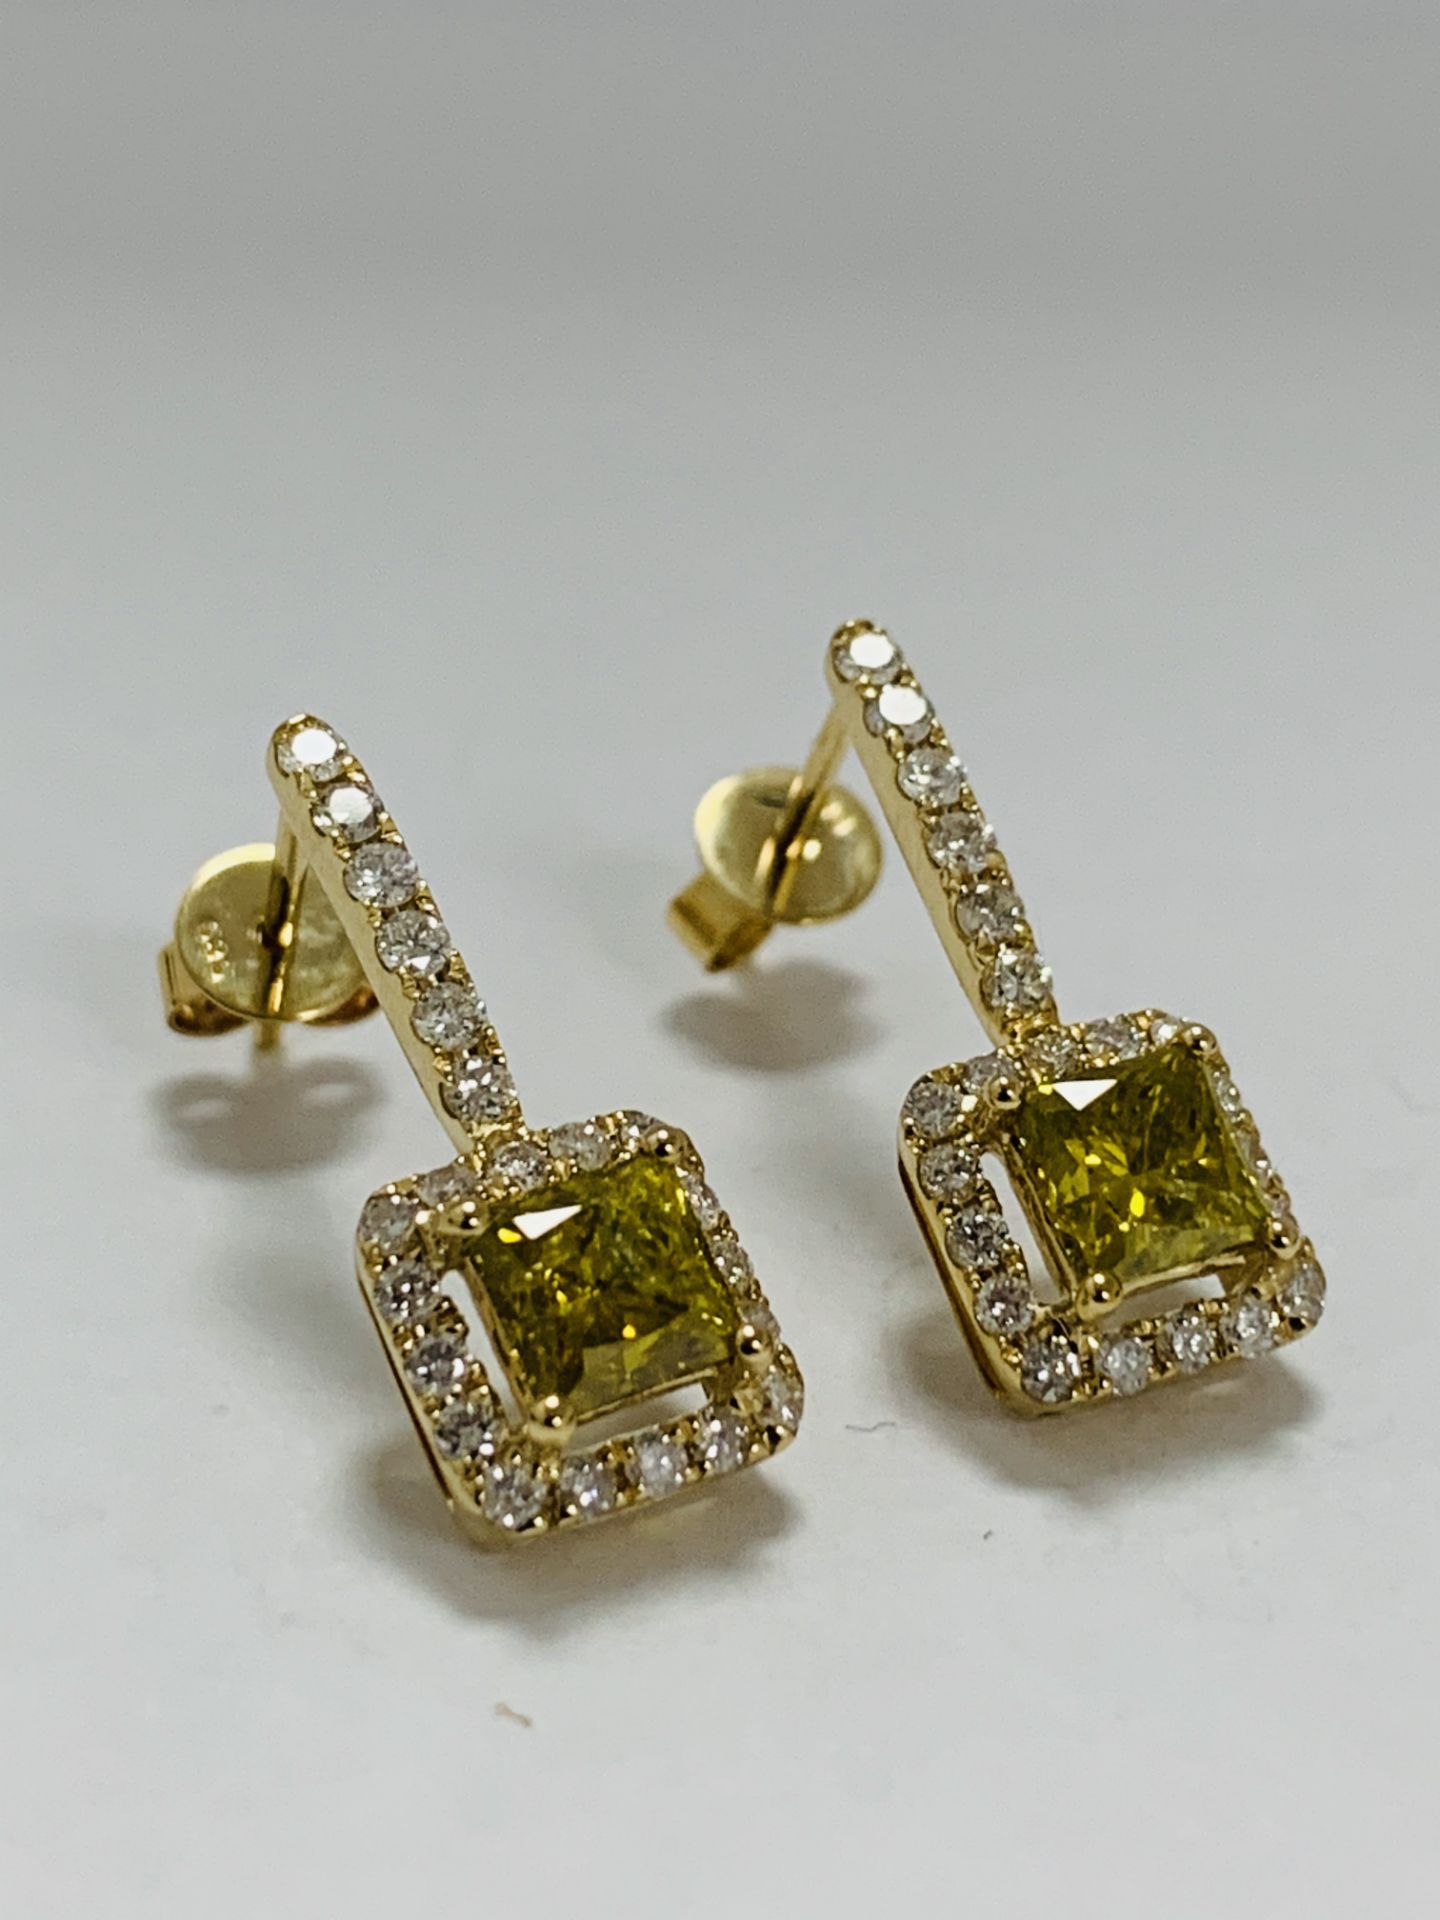 14K Yellow Gold Pair Of Earrings - Image 7 of 9